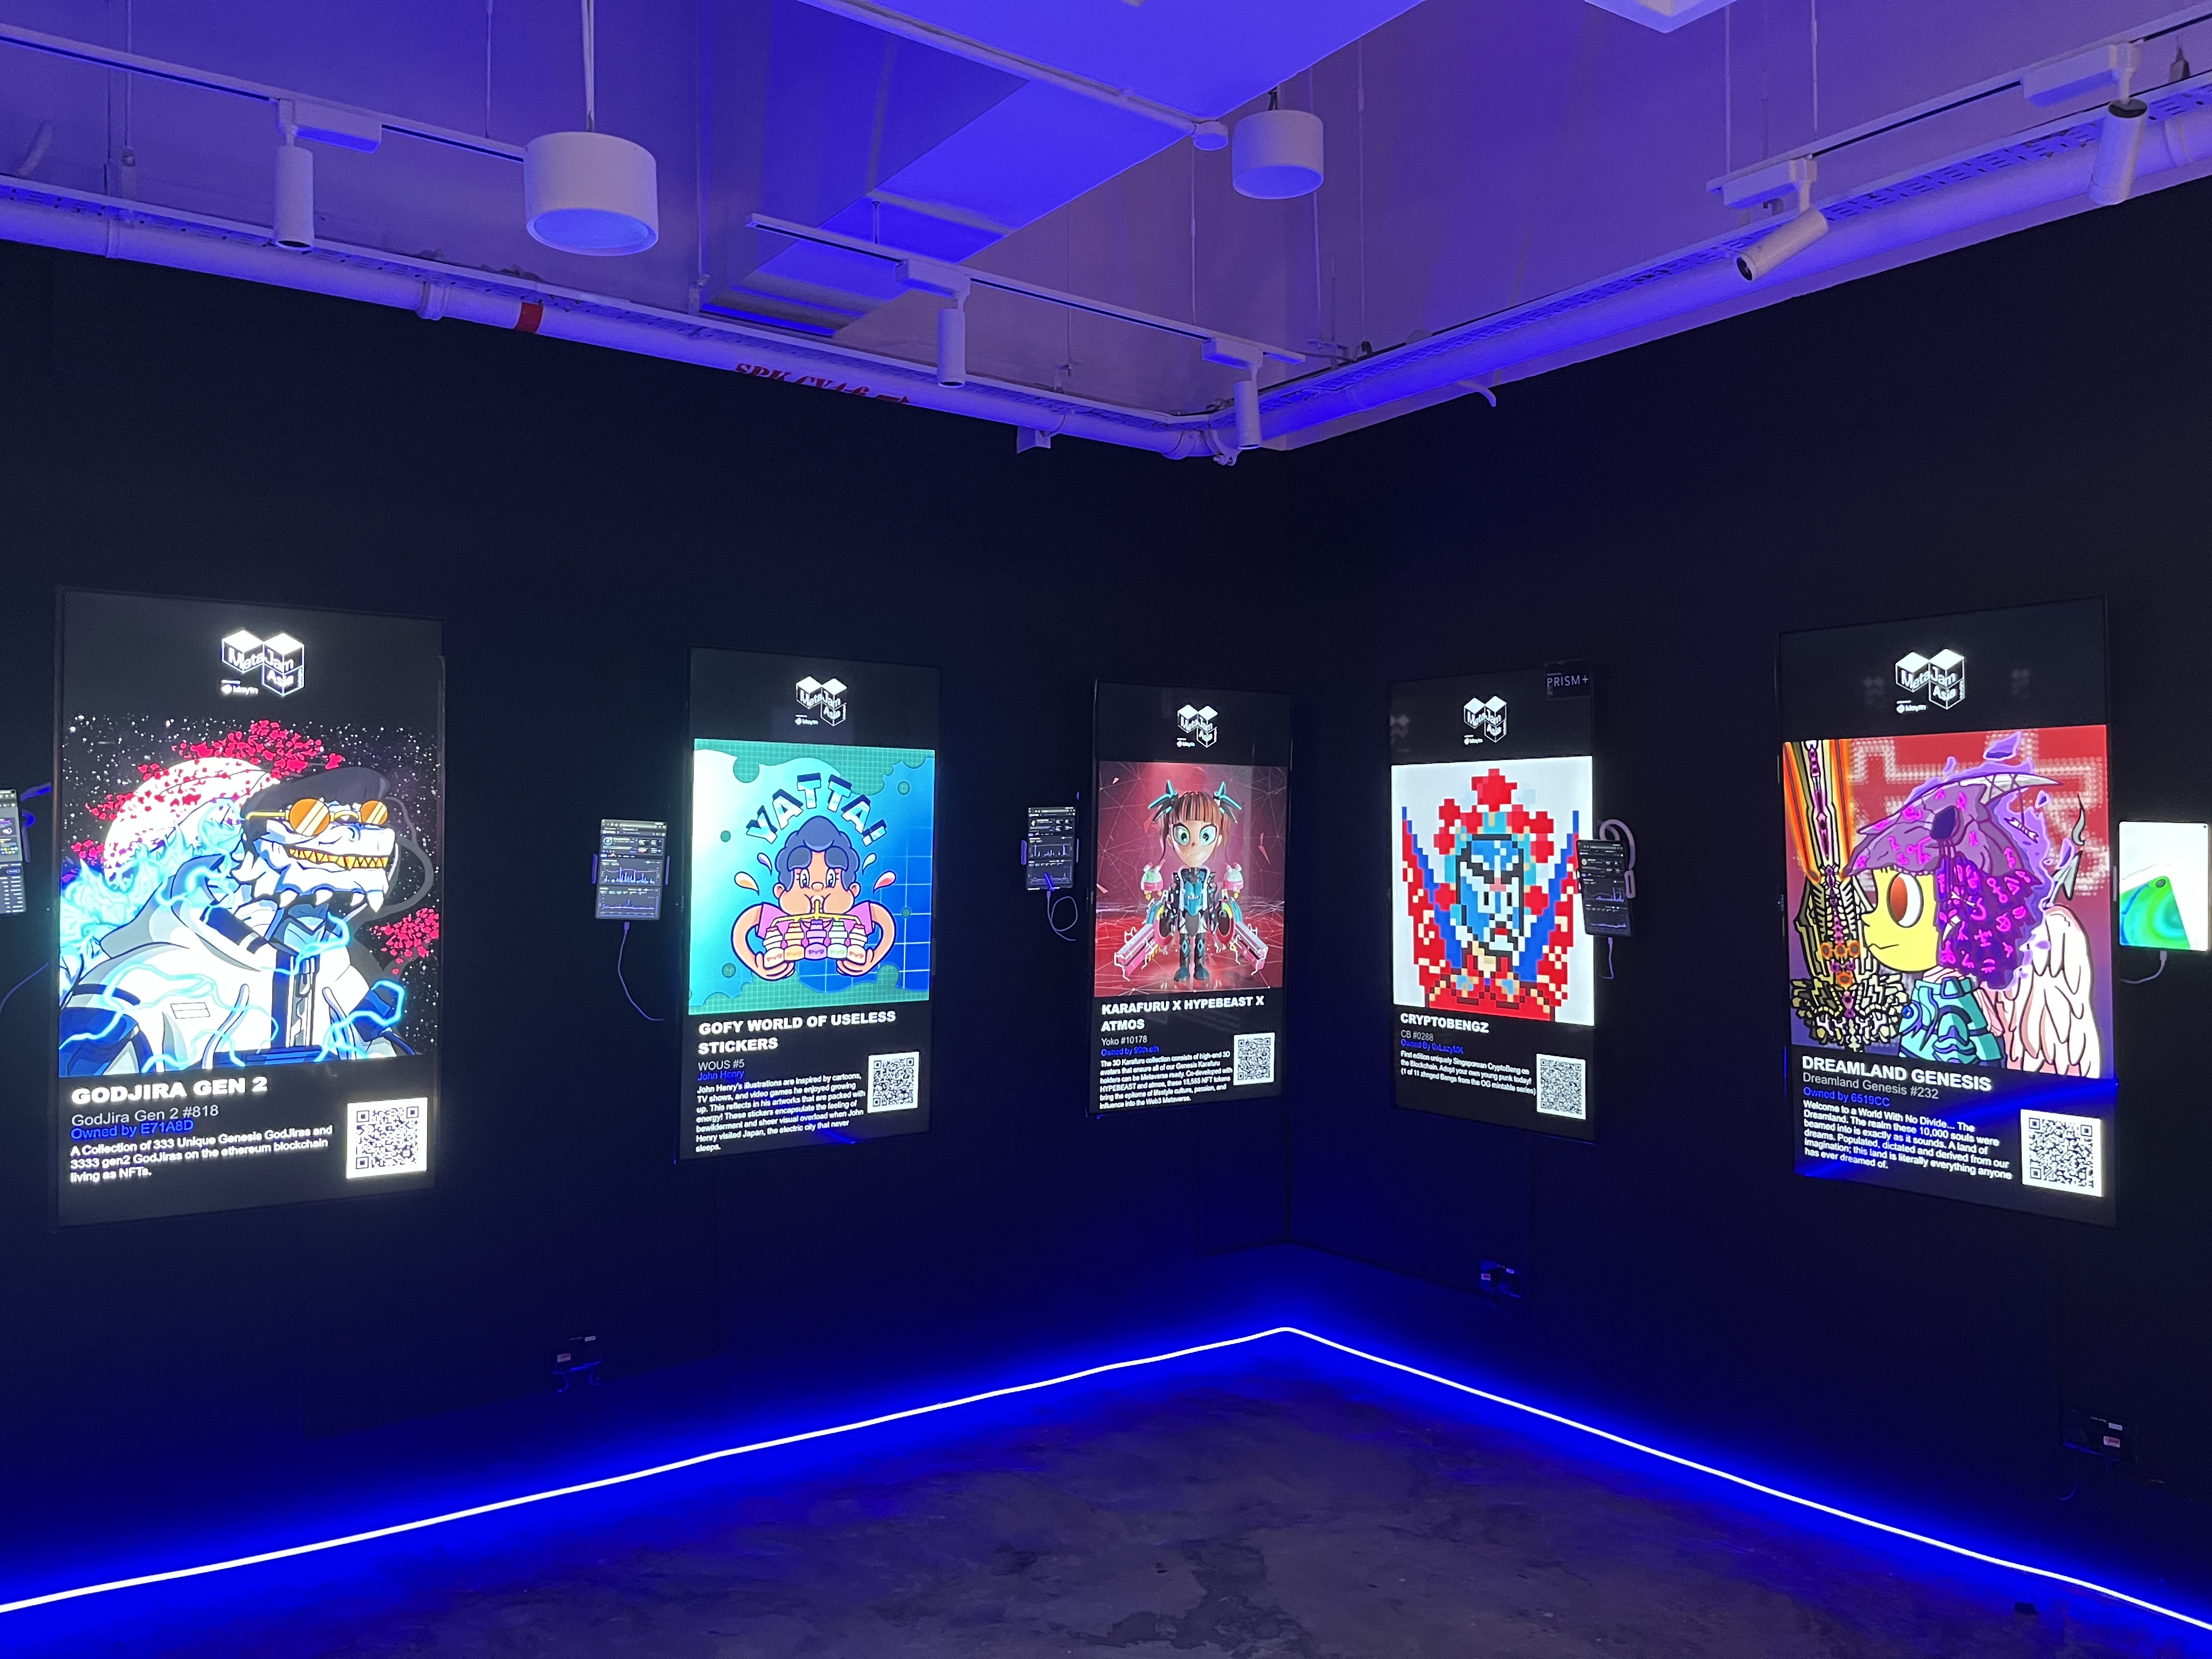 SERIES 3 SINGAPORE EXHIBITION: THE STICKER WALL - News